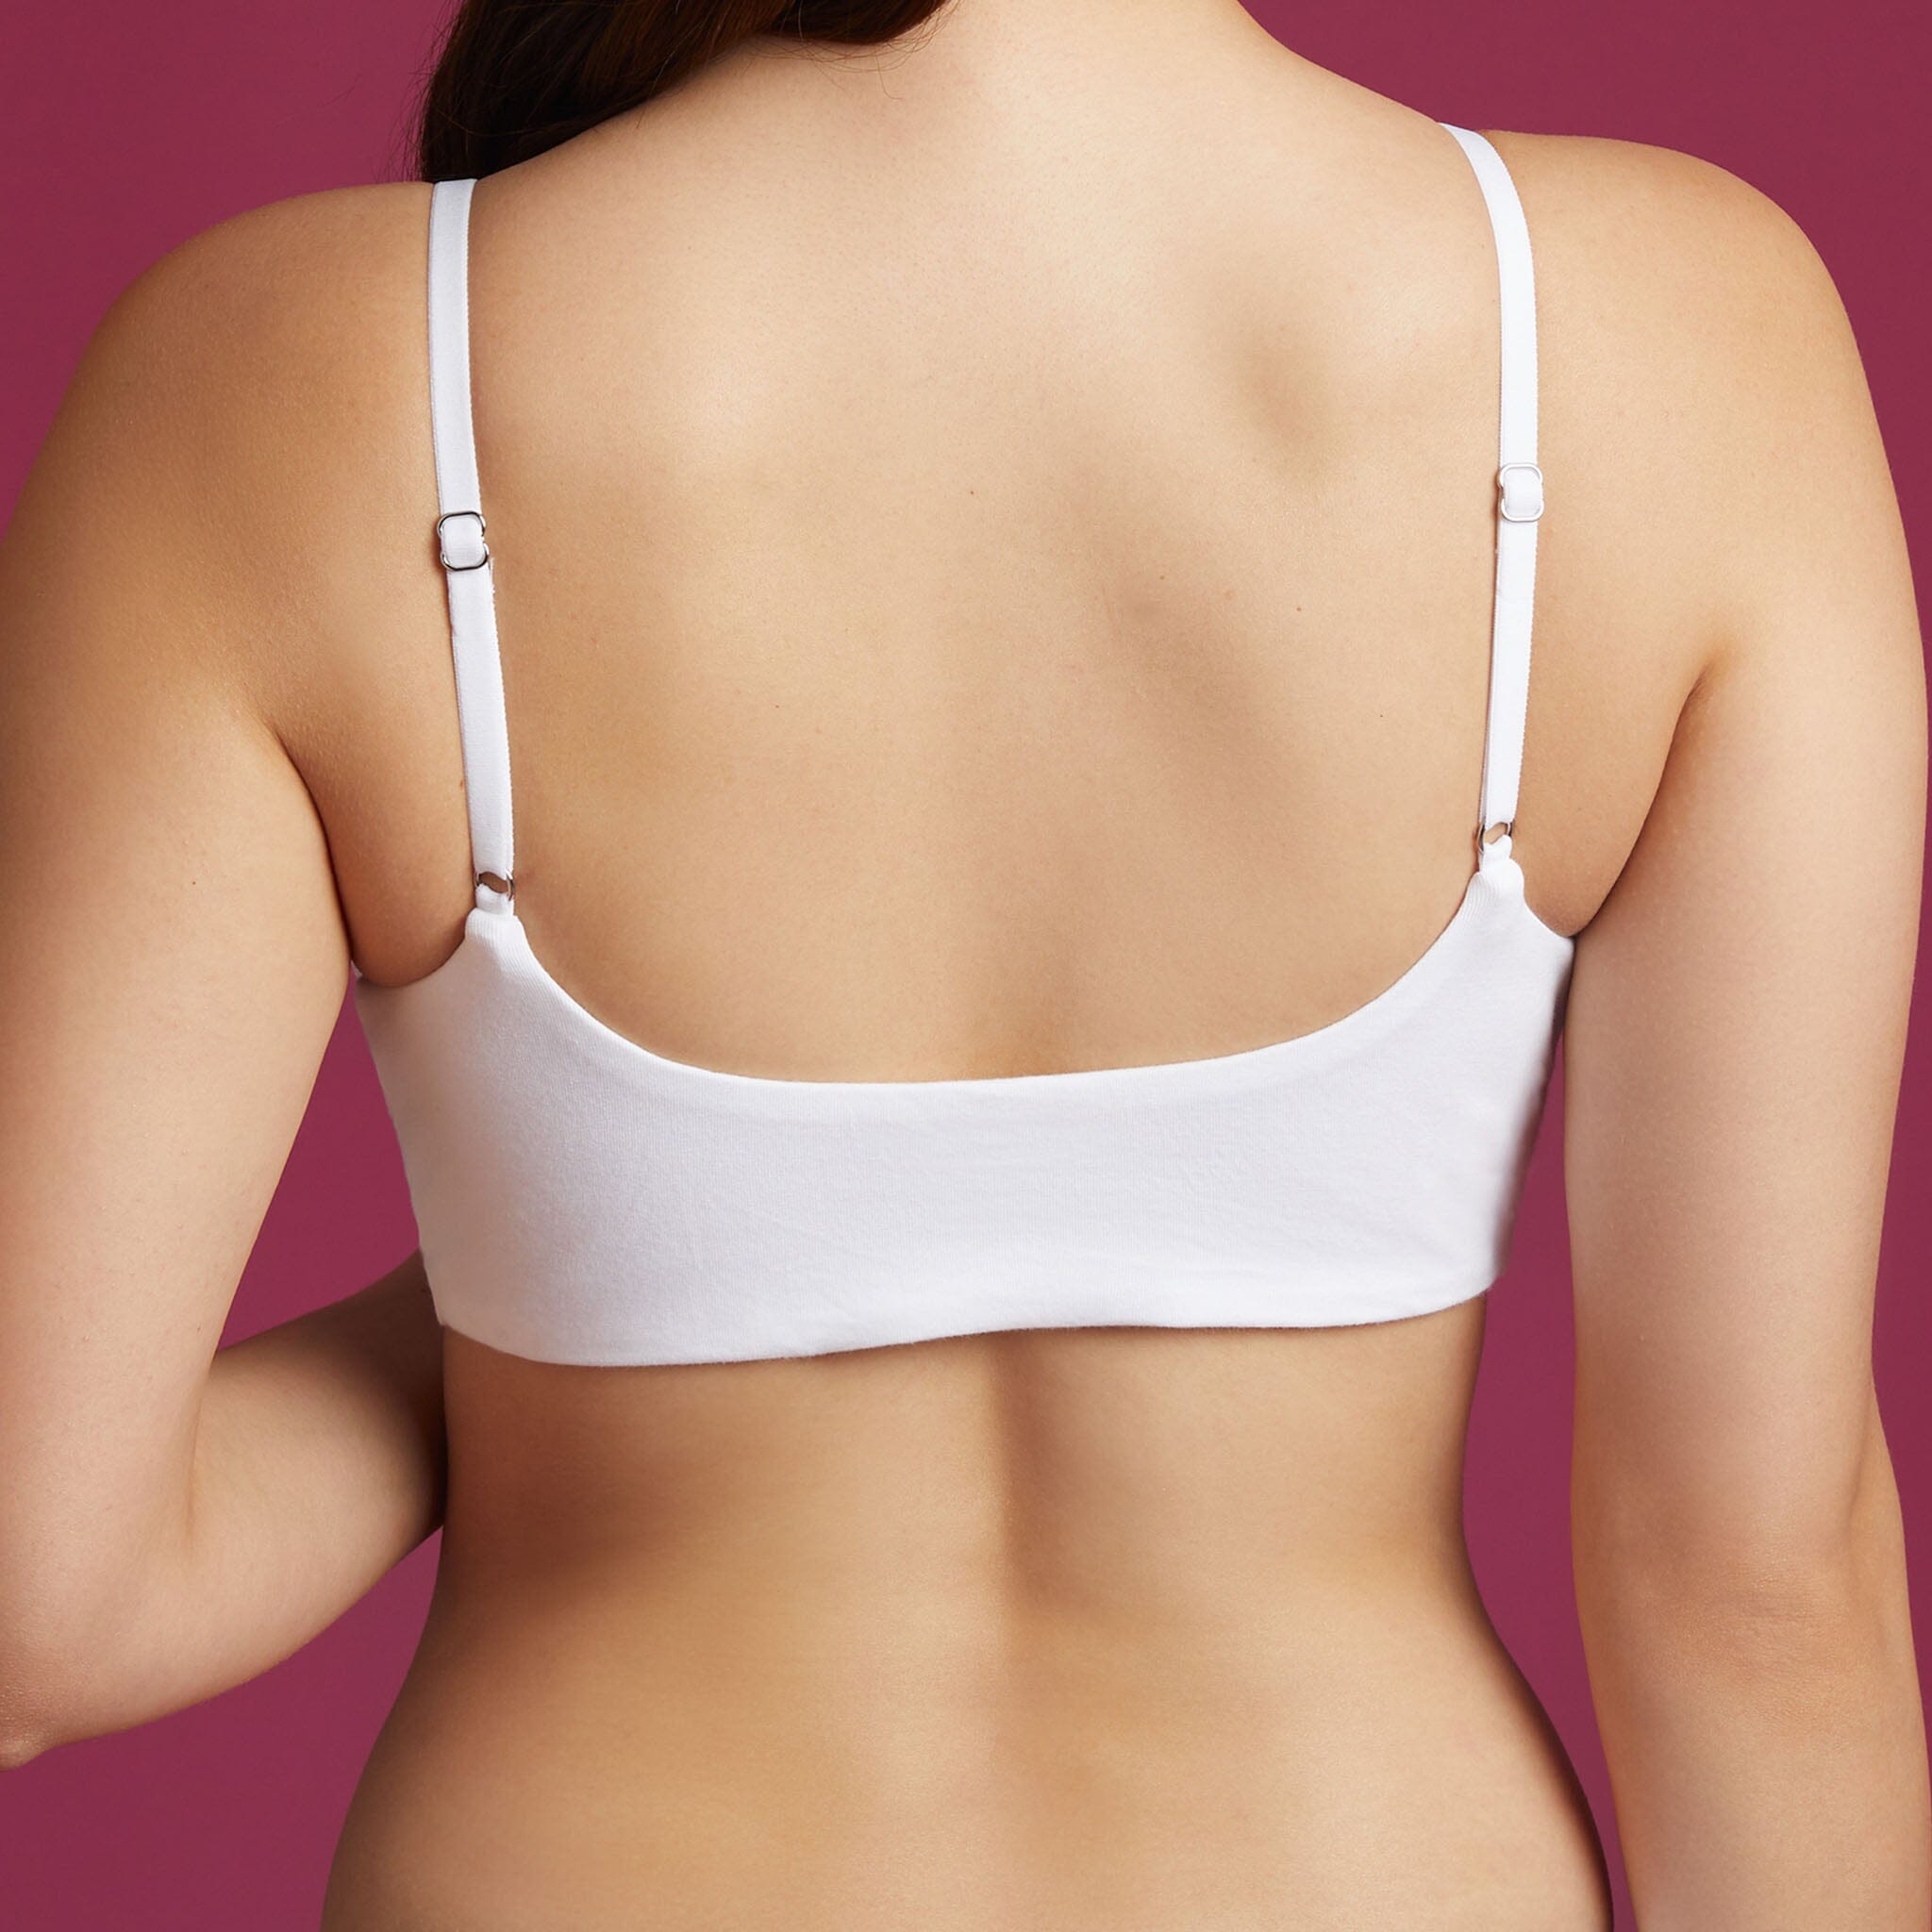 Tomgirl Apparel velcro fastening bras for small band sizes - Big